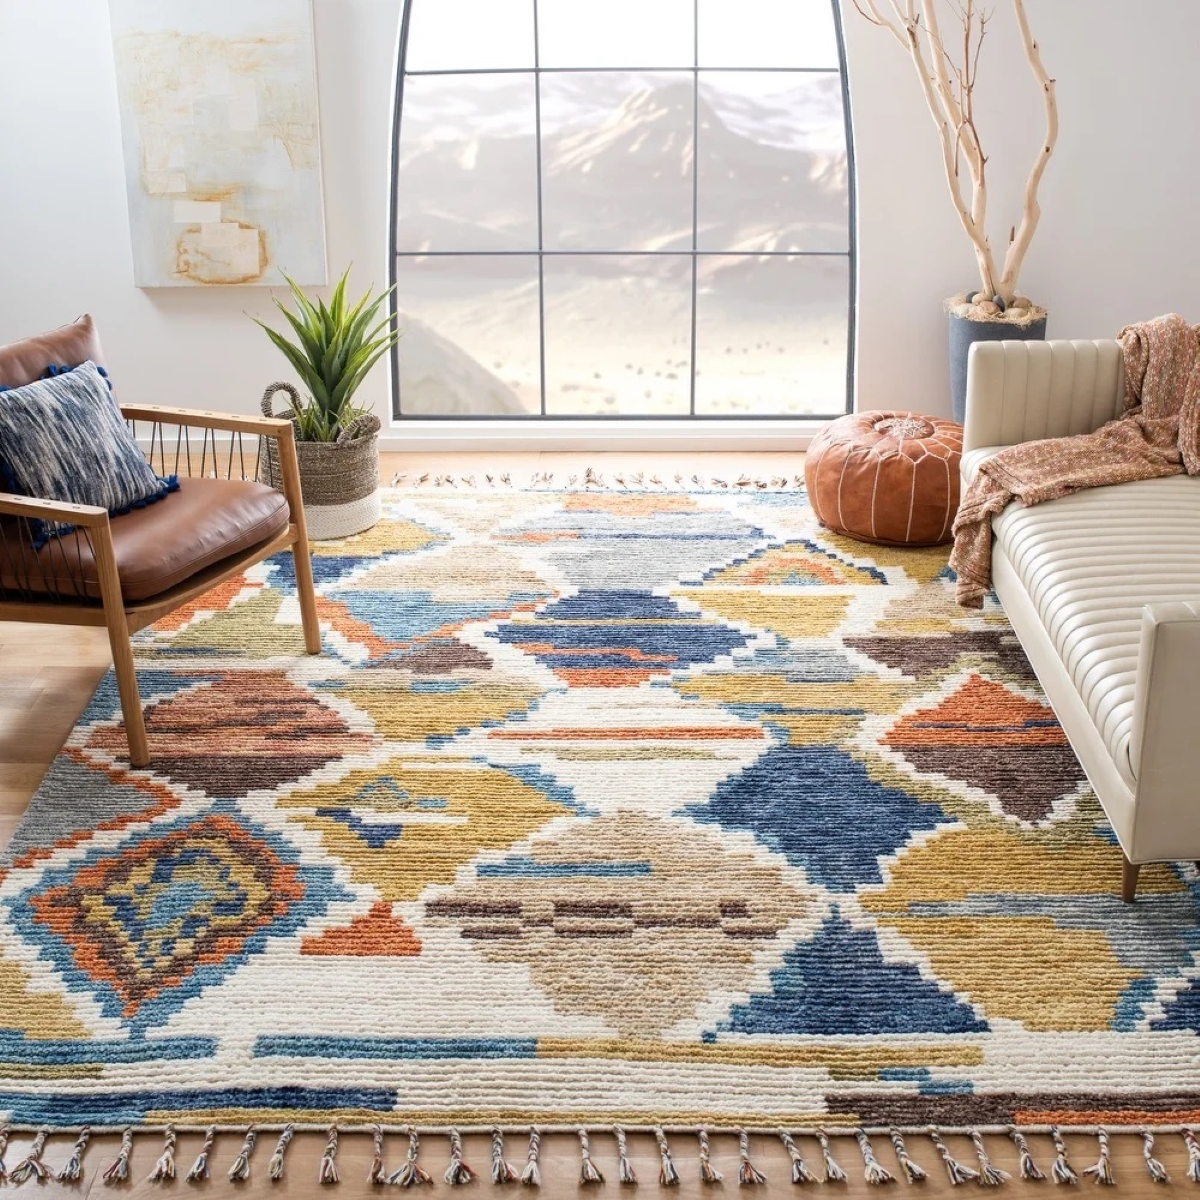 types of rugs - multi-color woven rug